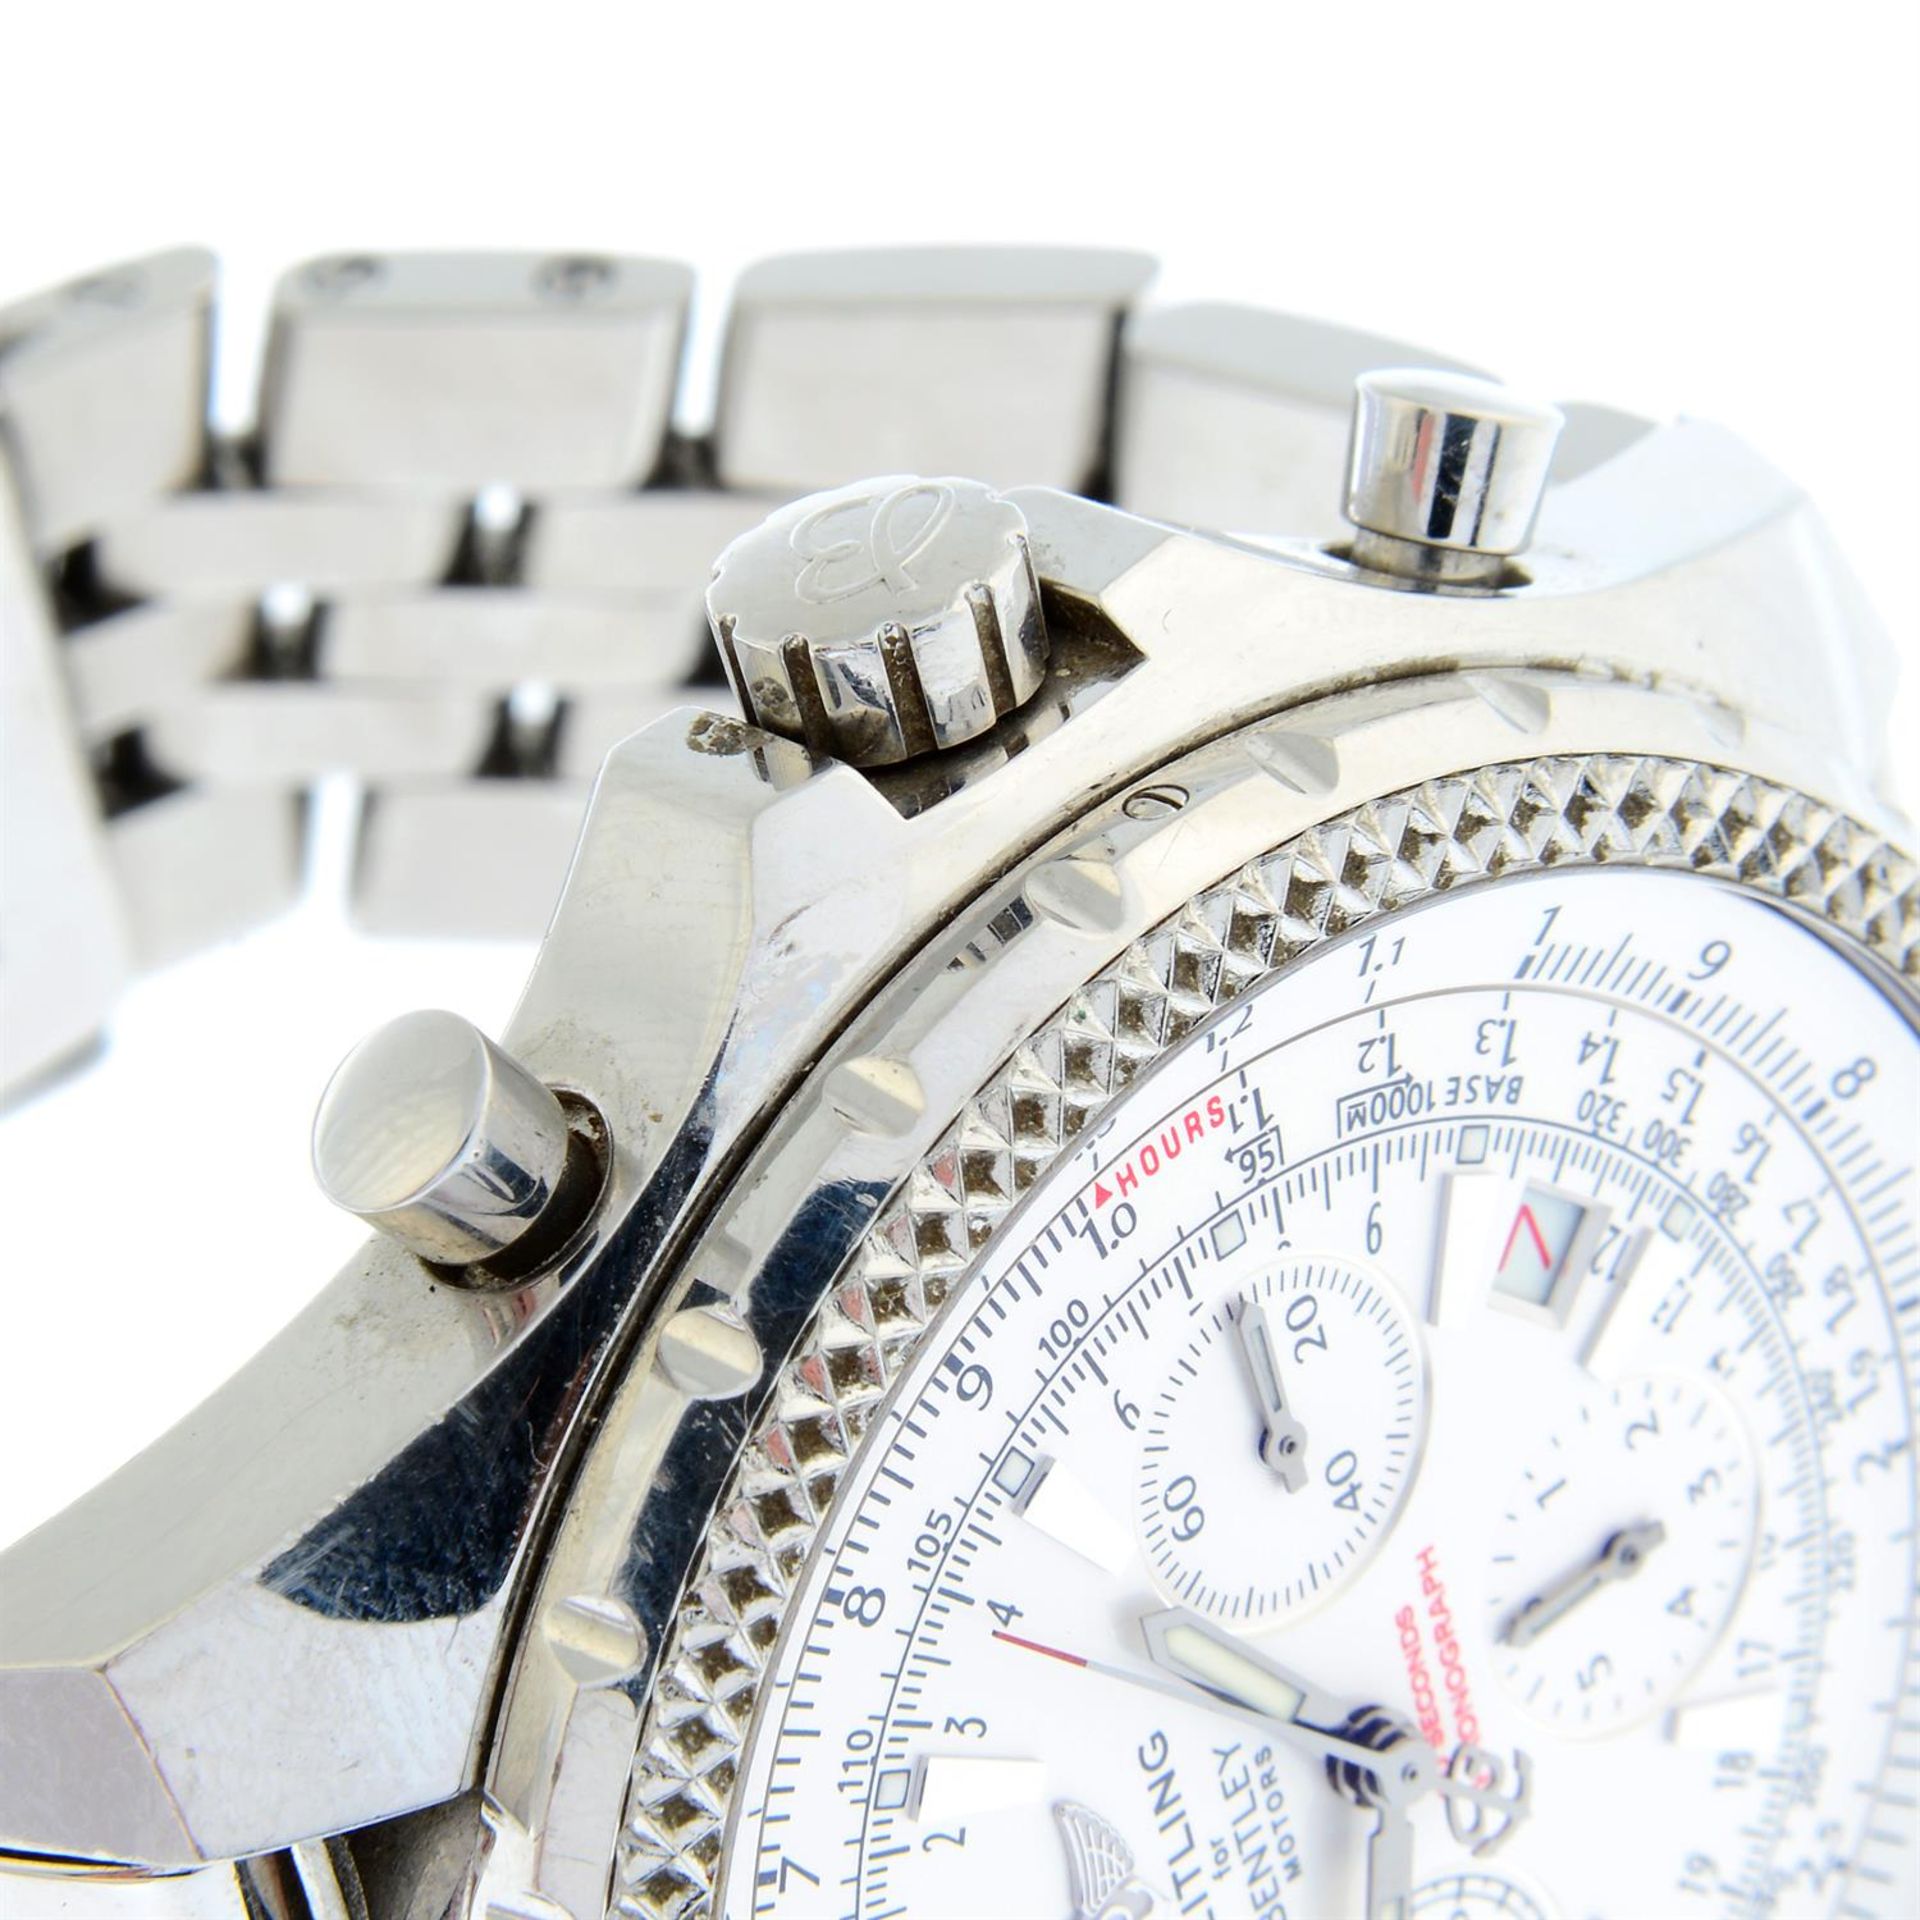 BREITLING - a stainless steel Breitling for Bentley chronograph bracelet watch, 49mm. - Image 4 of 5